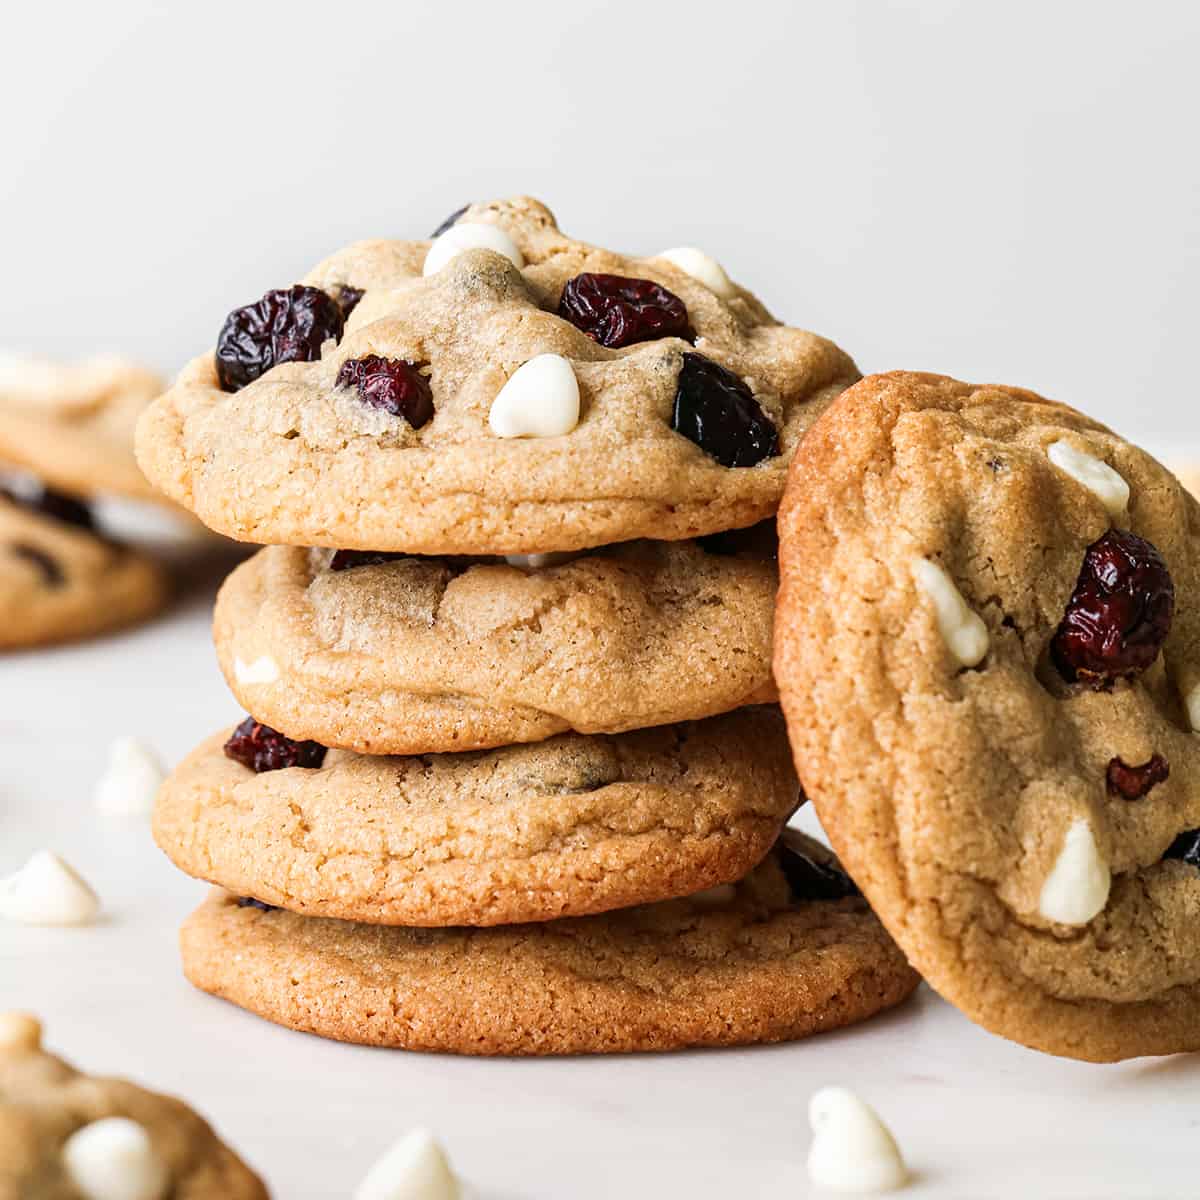 front view of a stack of 4 White Chocolate Cranberry Cookies with one cookie leaning against the stack